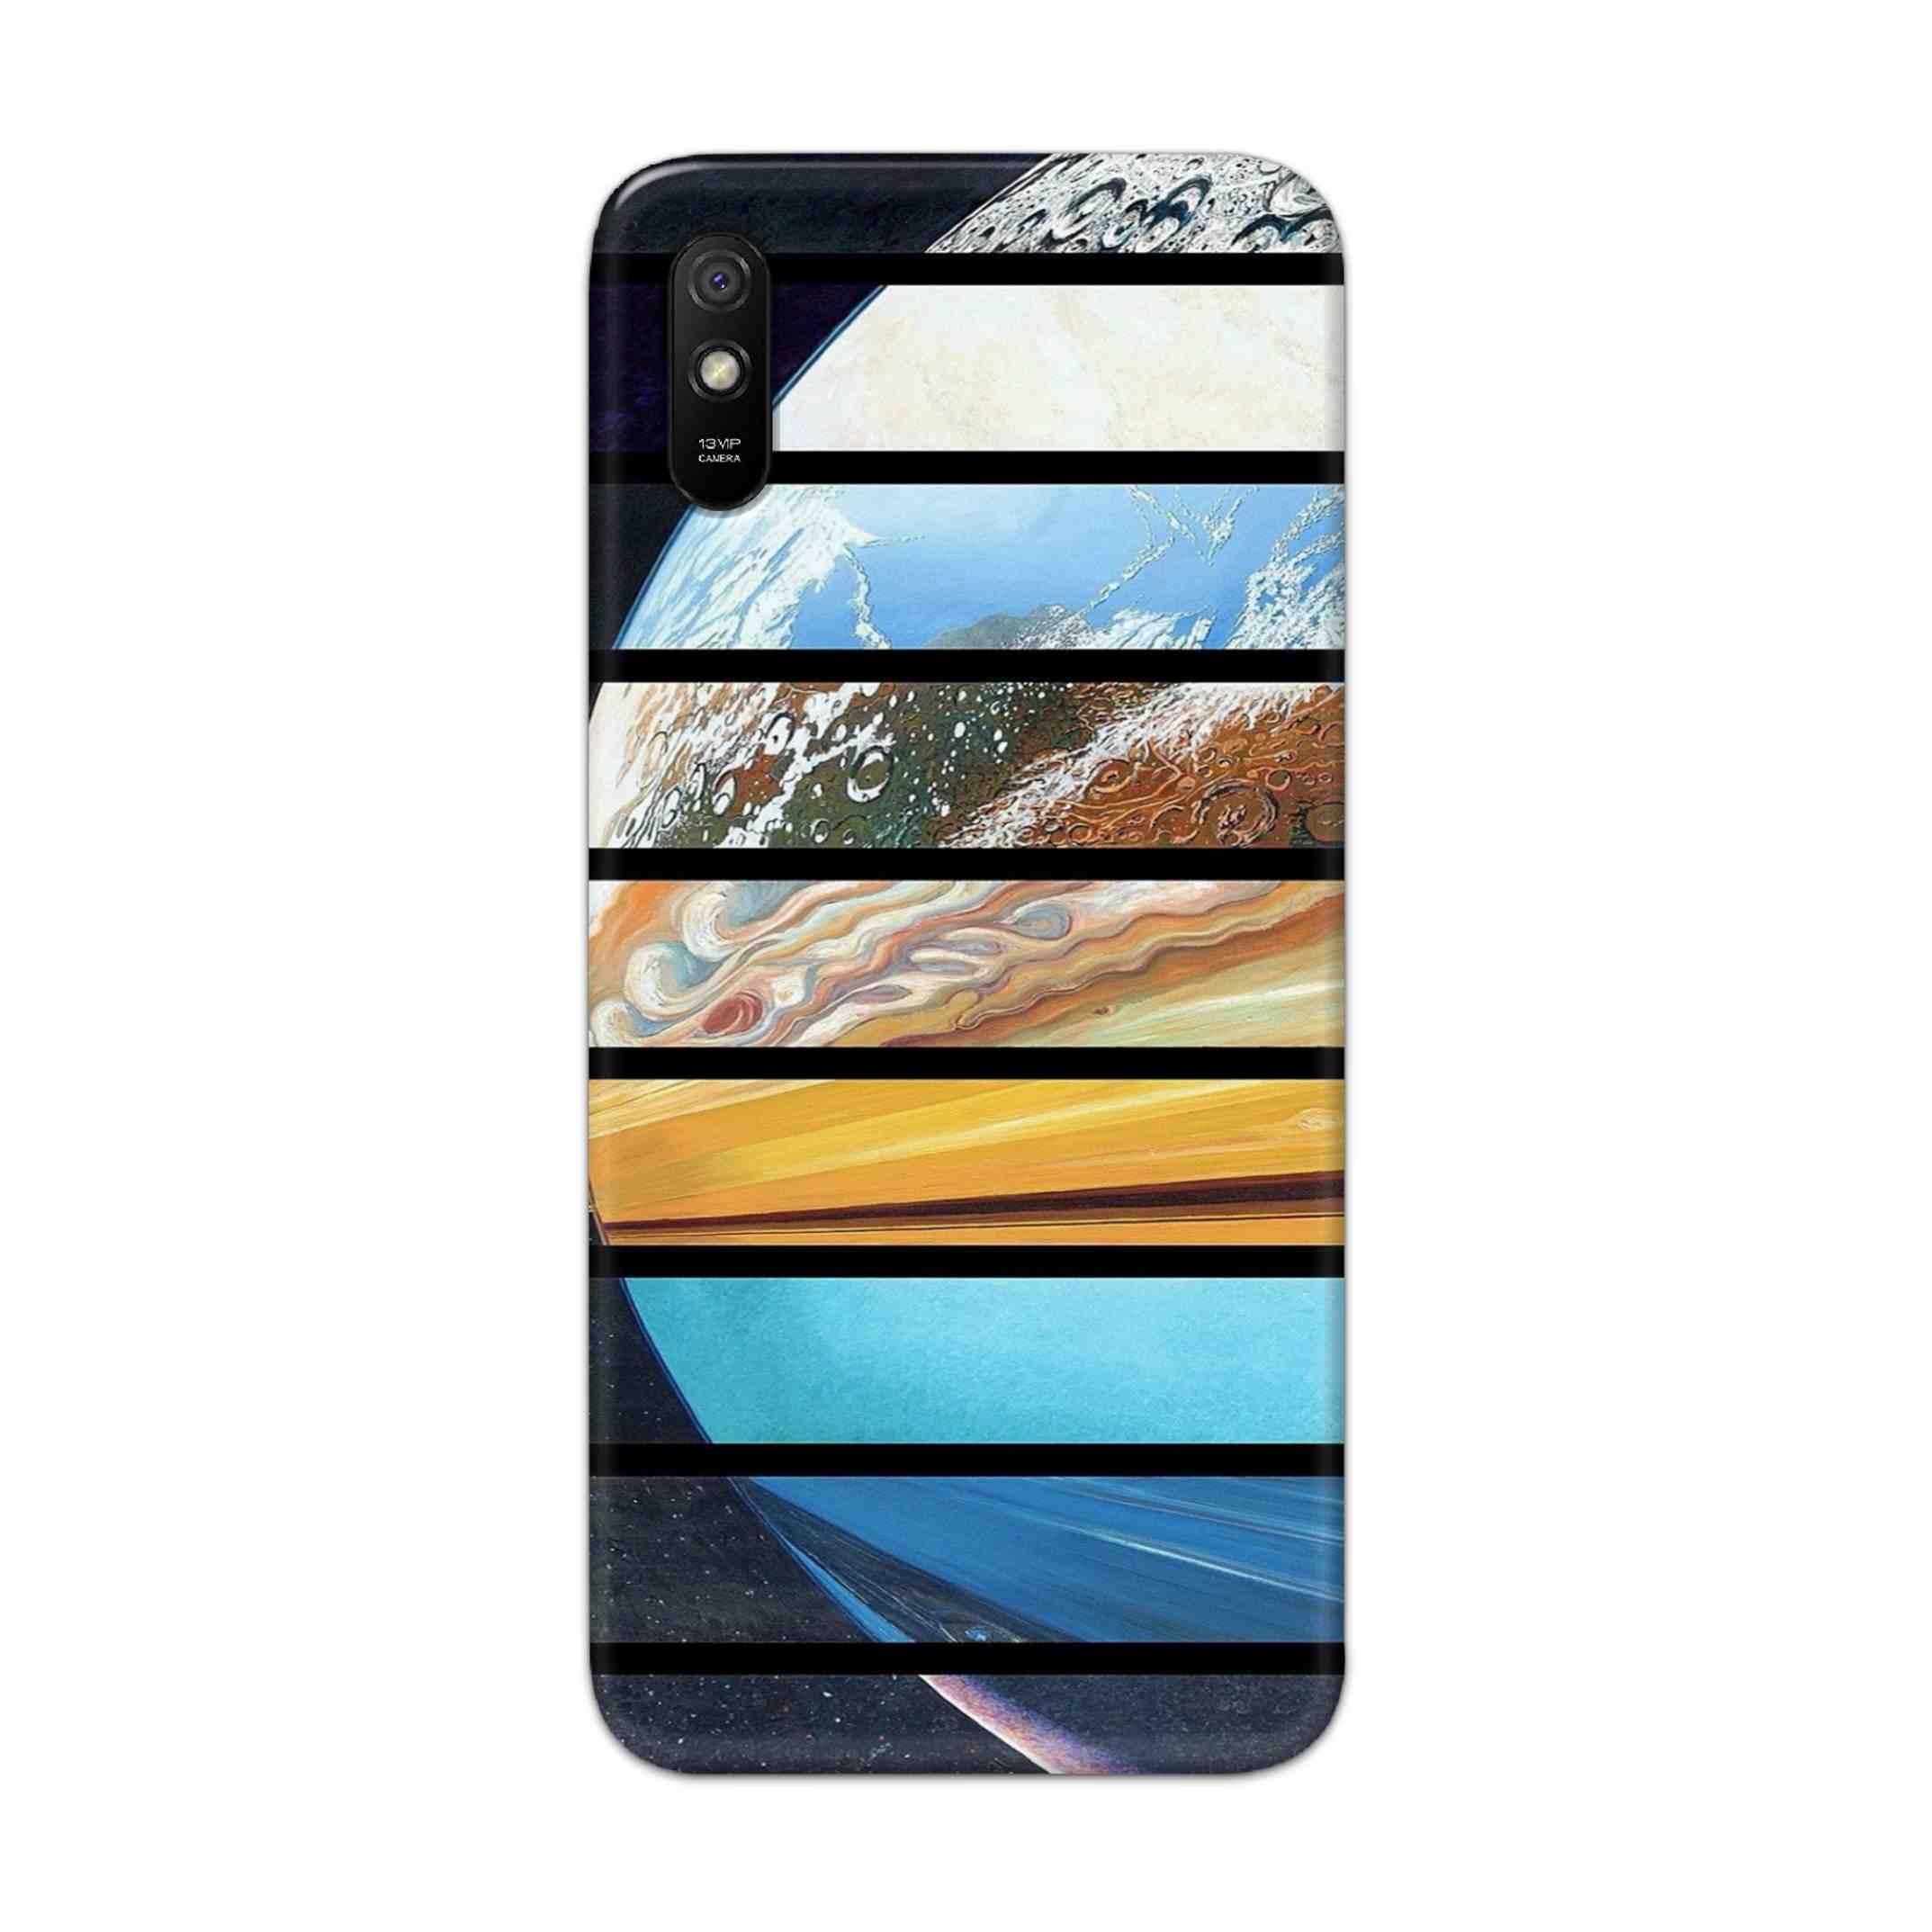 Buy Colourful Earth Hard Back Mobile Phone Case Cover For Redmi 9A Online